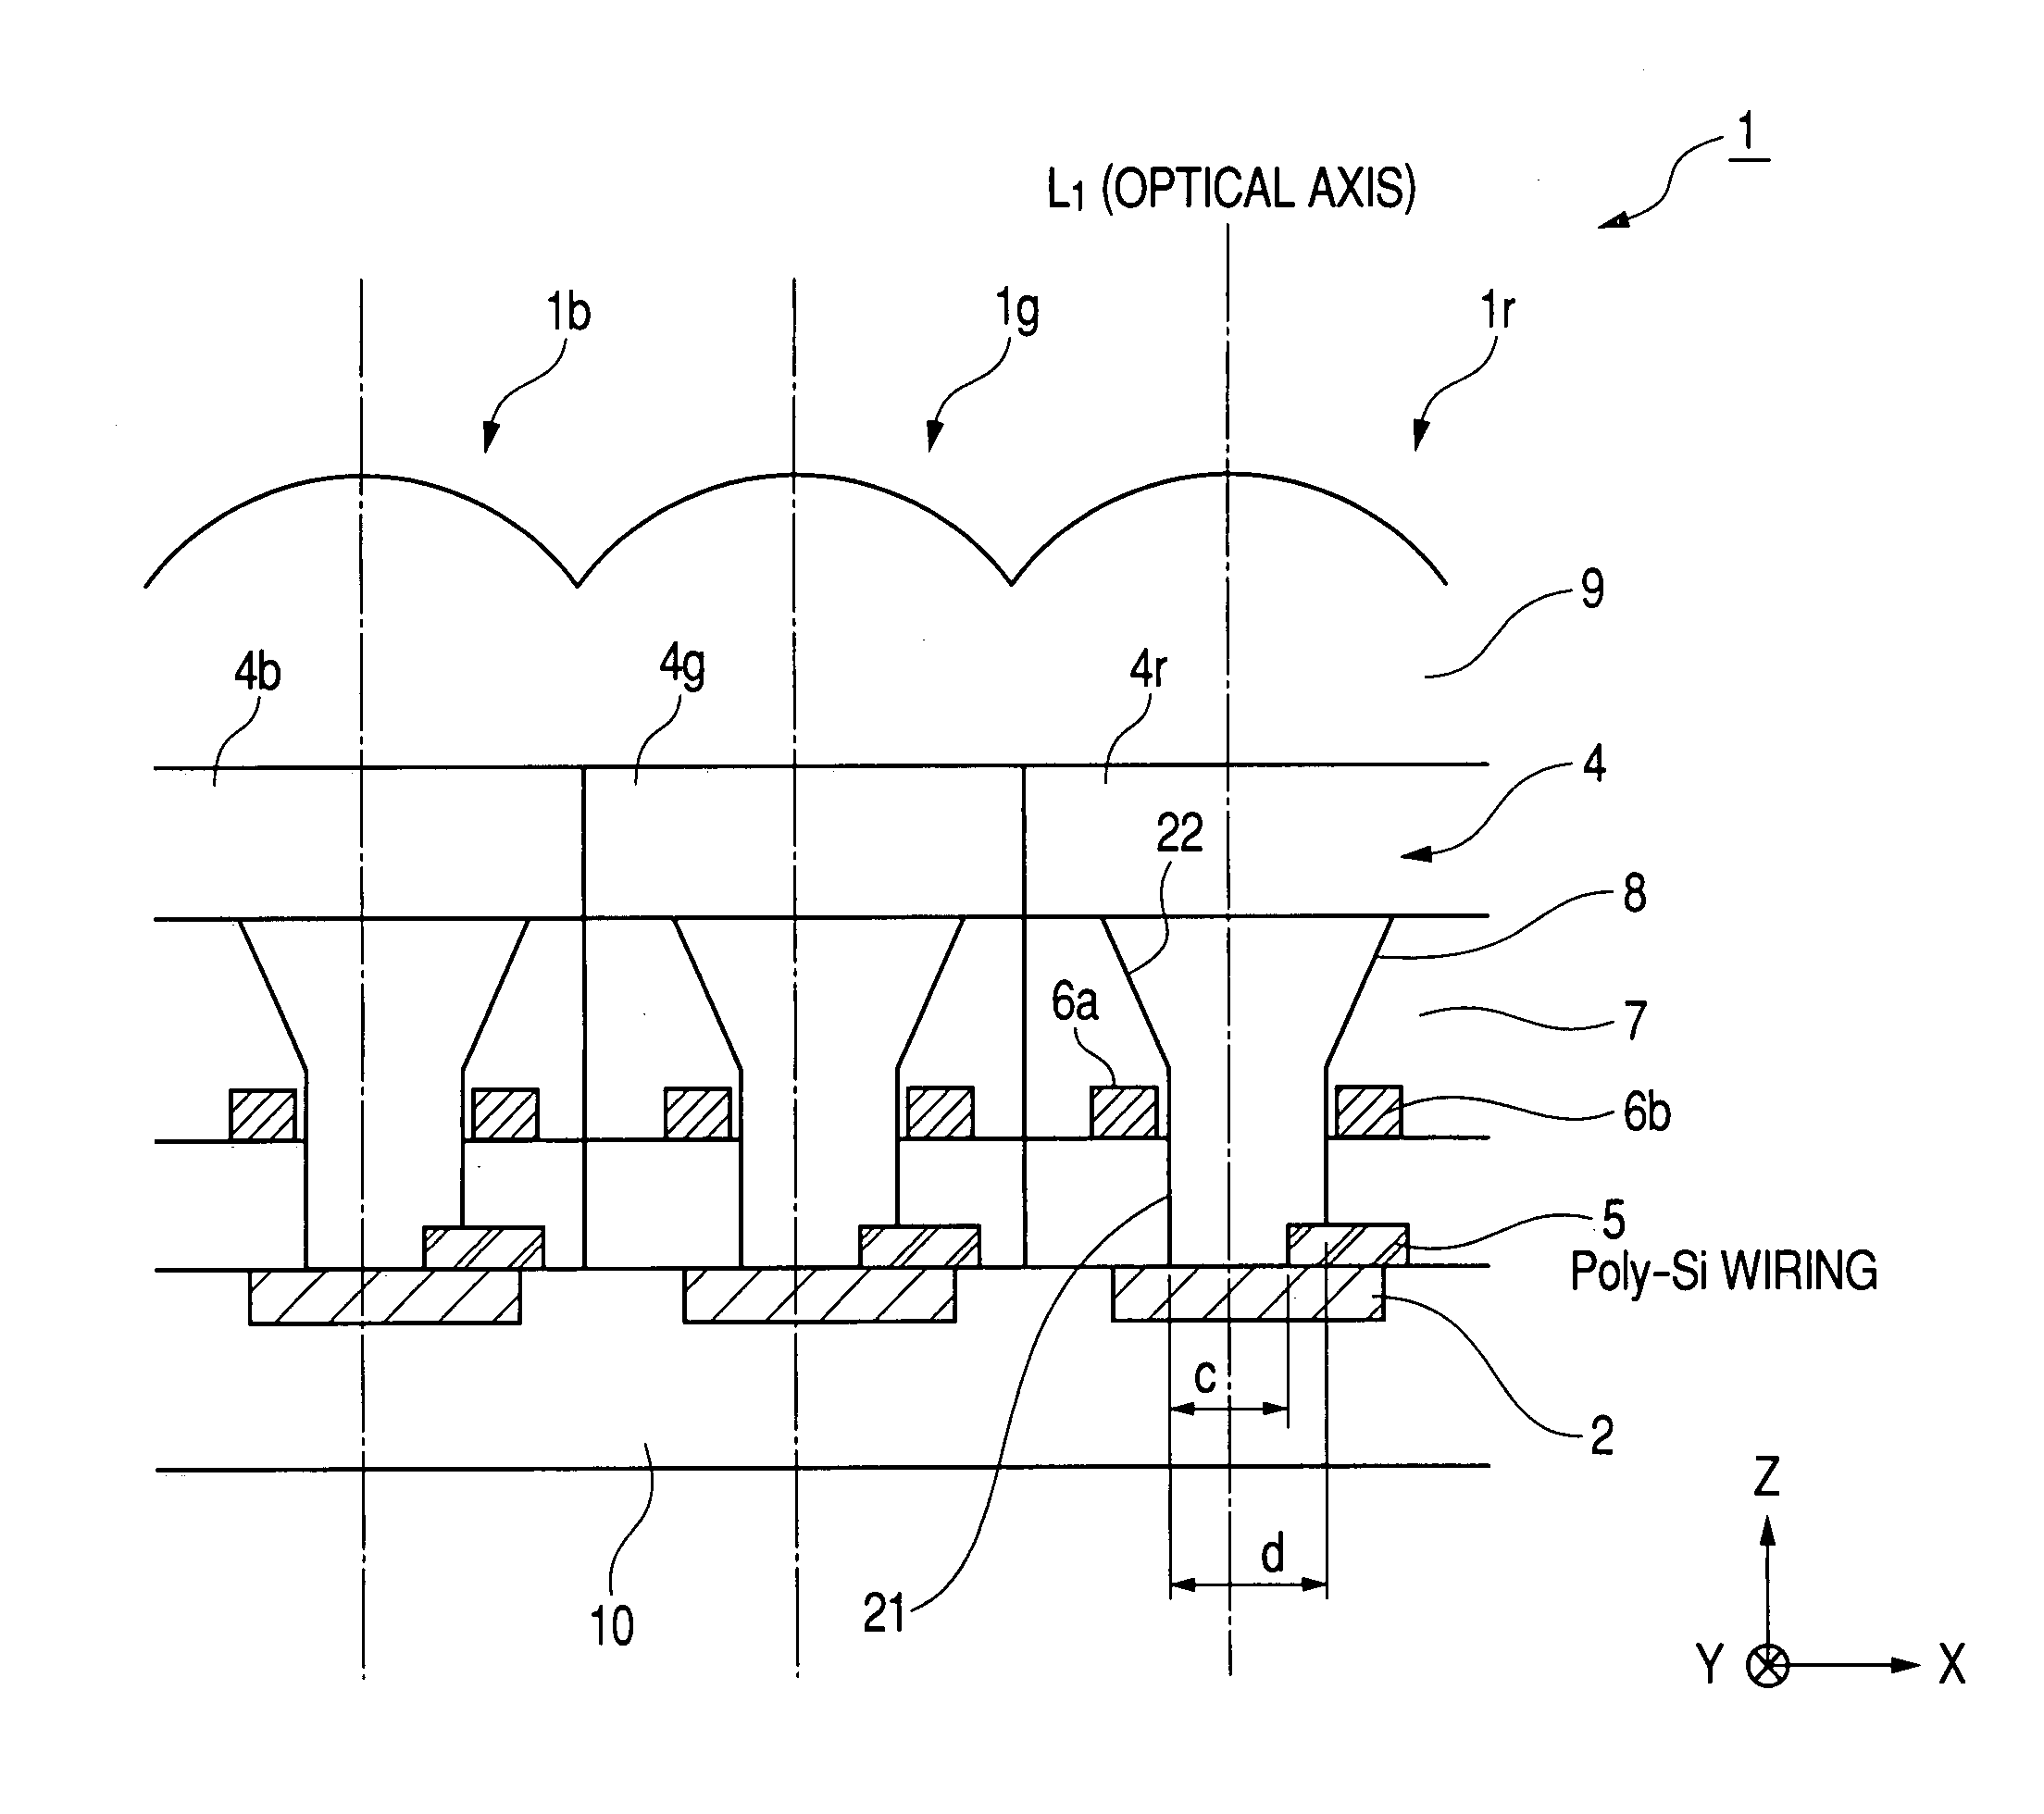 Image pick-up device having well structure and image pick-up system using the image pick-up device